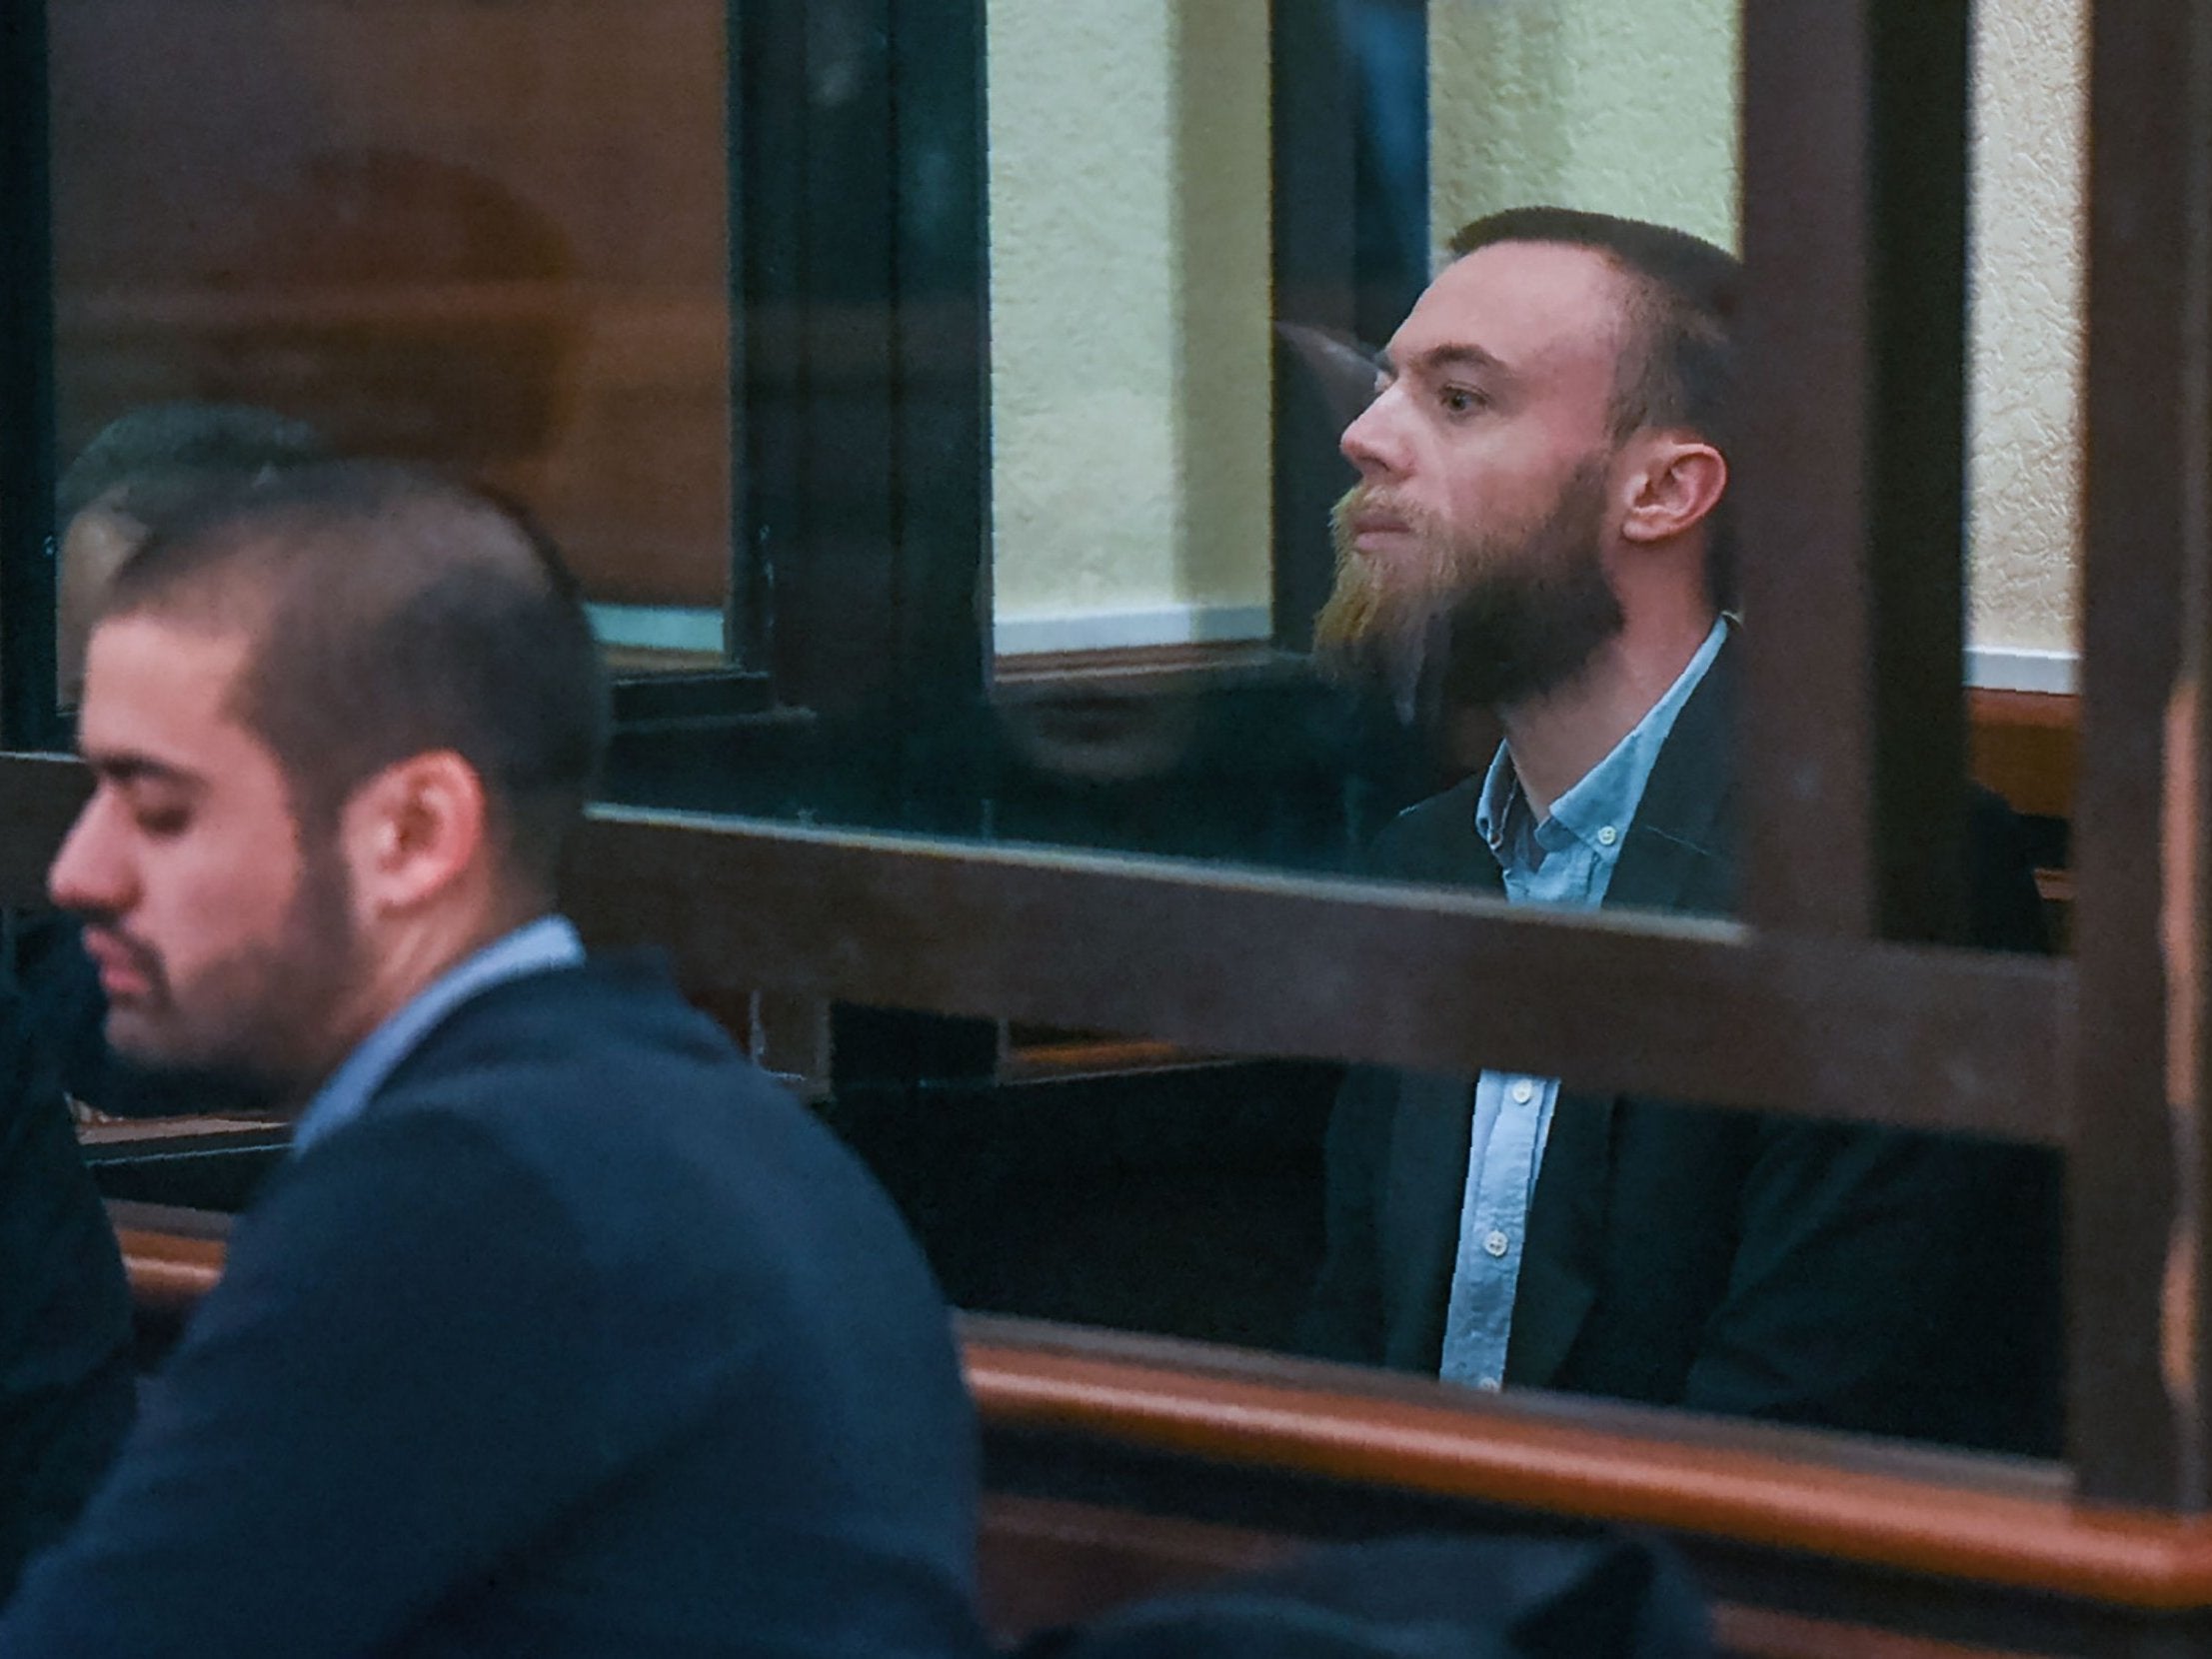 Jack Shepherd sits inside a defendants’ cage during an extradition hearing at a court in Tbilisi, Georgia in January 2019